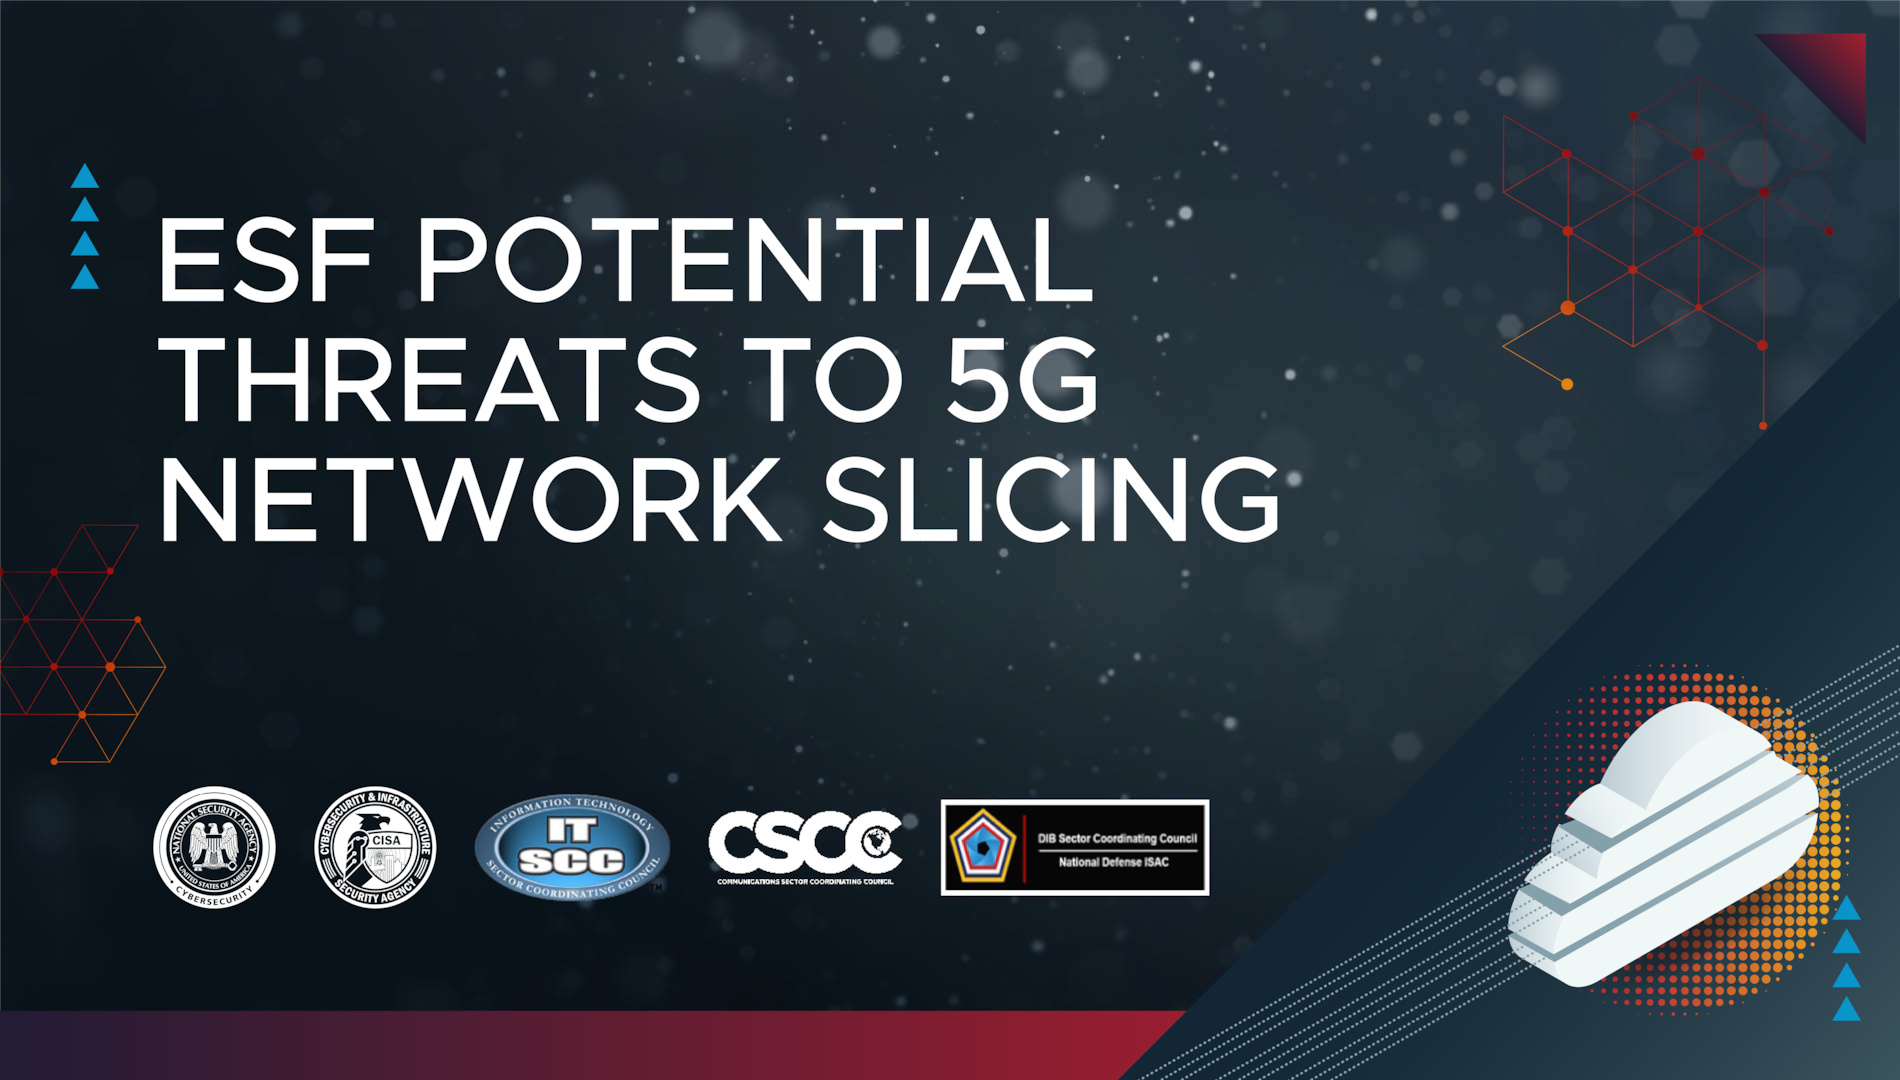 ESF Potential Threats to 5G Network Slicing